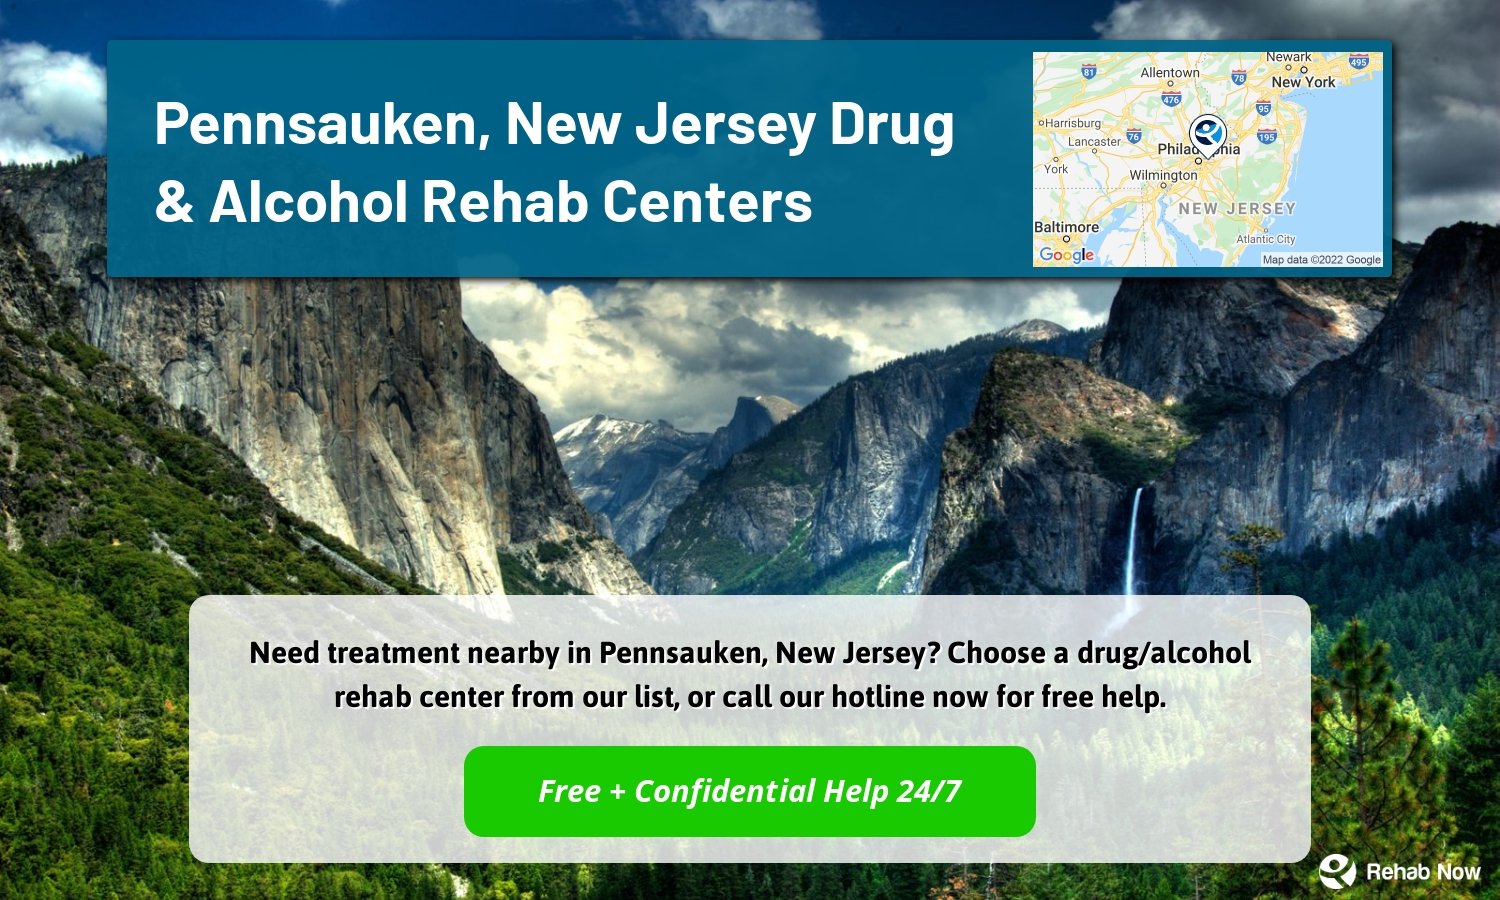 Need treatment nearby in Pennsauken, New Jersey? Choose a drug/alcohol rehab center from our list, or call our hotline now for free help.